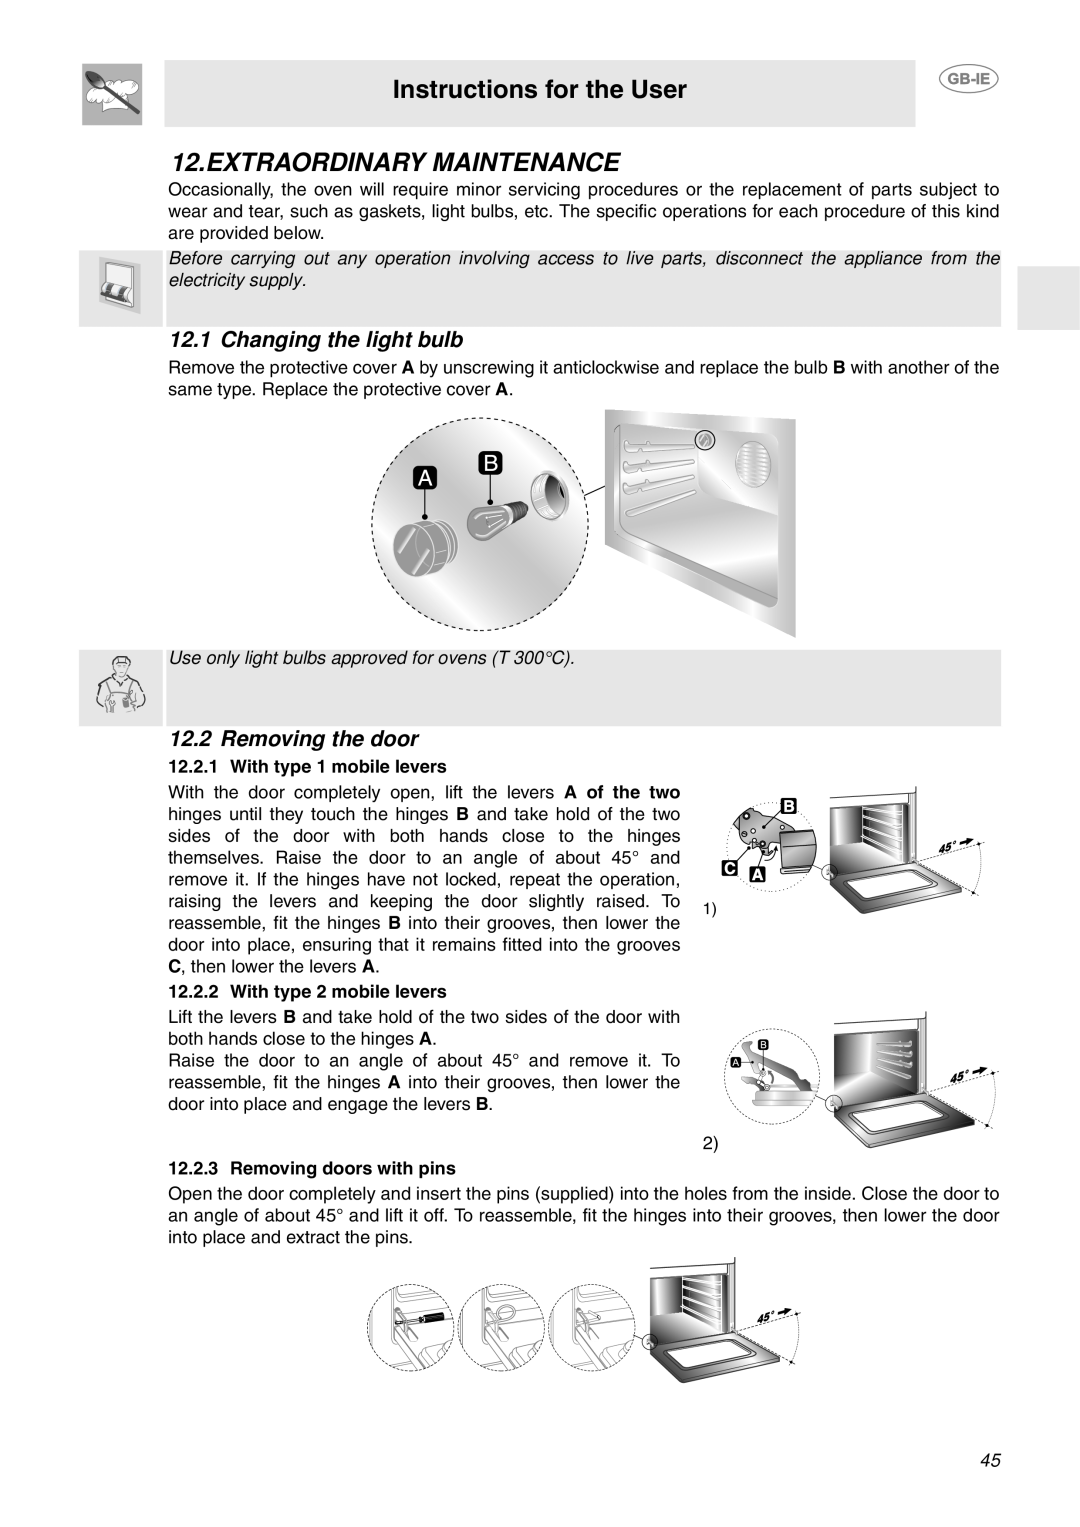 Smeg FP850APZ manual Extraordinary Maintenance, Changing the light bulb, Removing the door, Instructions for the User 